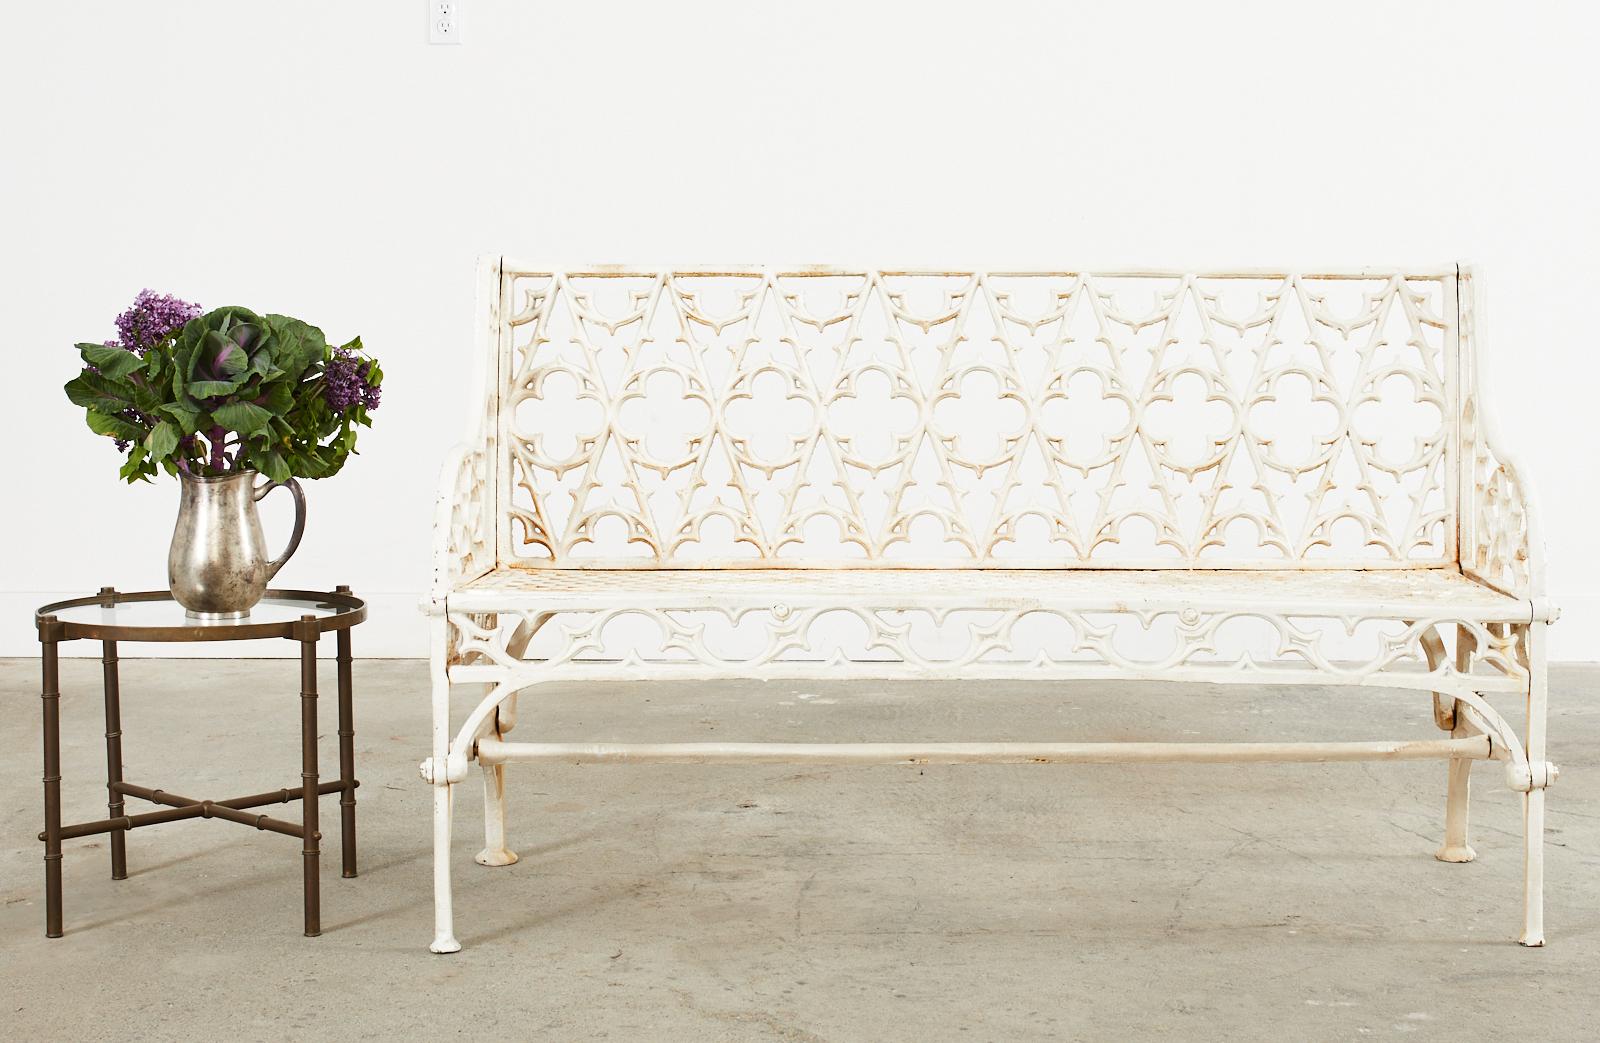 Stunning pair of white English Coalbrookdale foundry attributed cast iron garden benches. Made in the dramatic gothic revival taste featuring a gothic tracery backrest centered by quatrefoil form designs. The gracefully curved arms enclosing